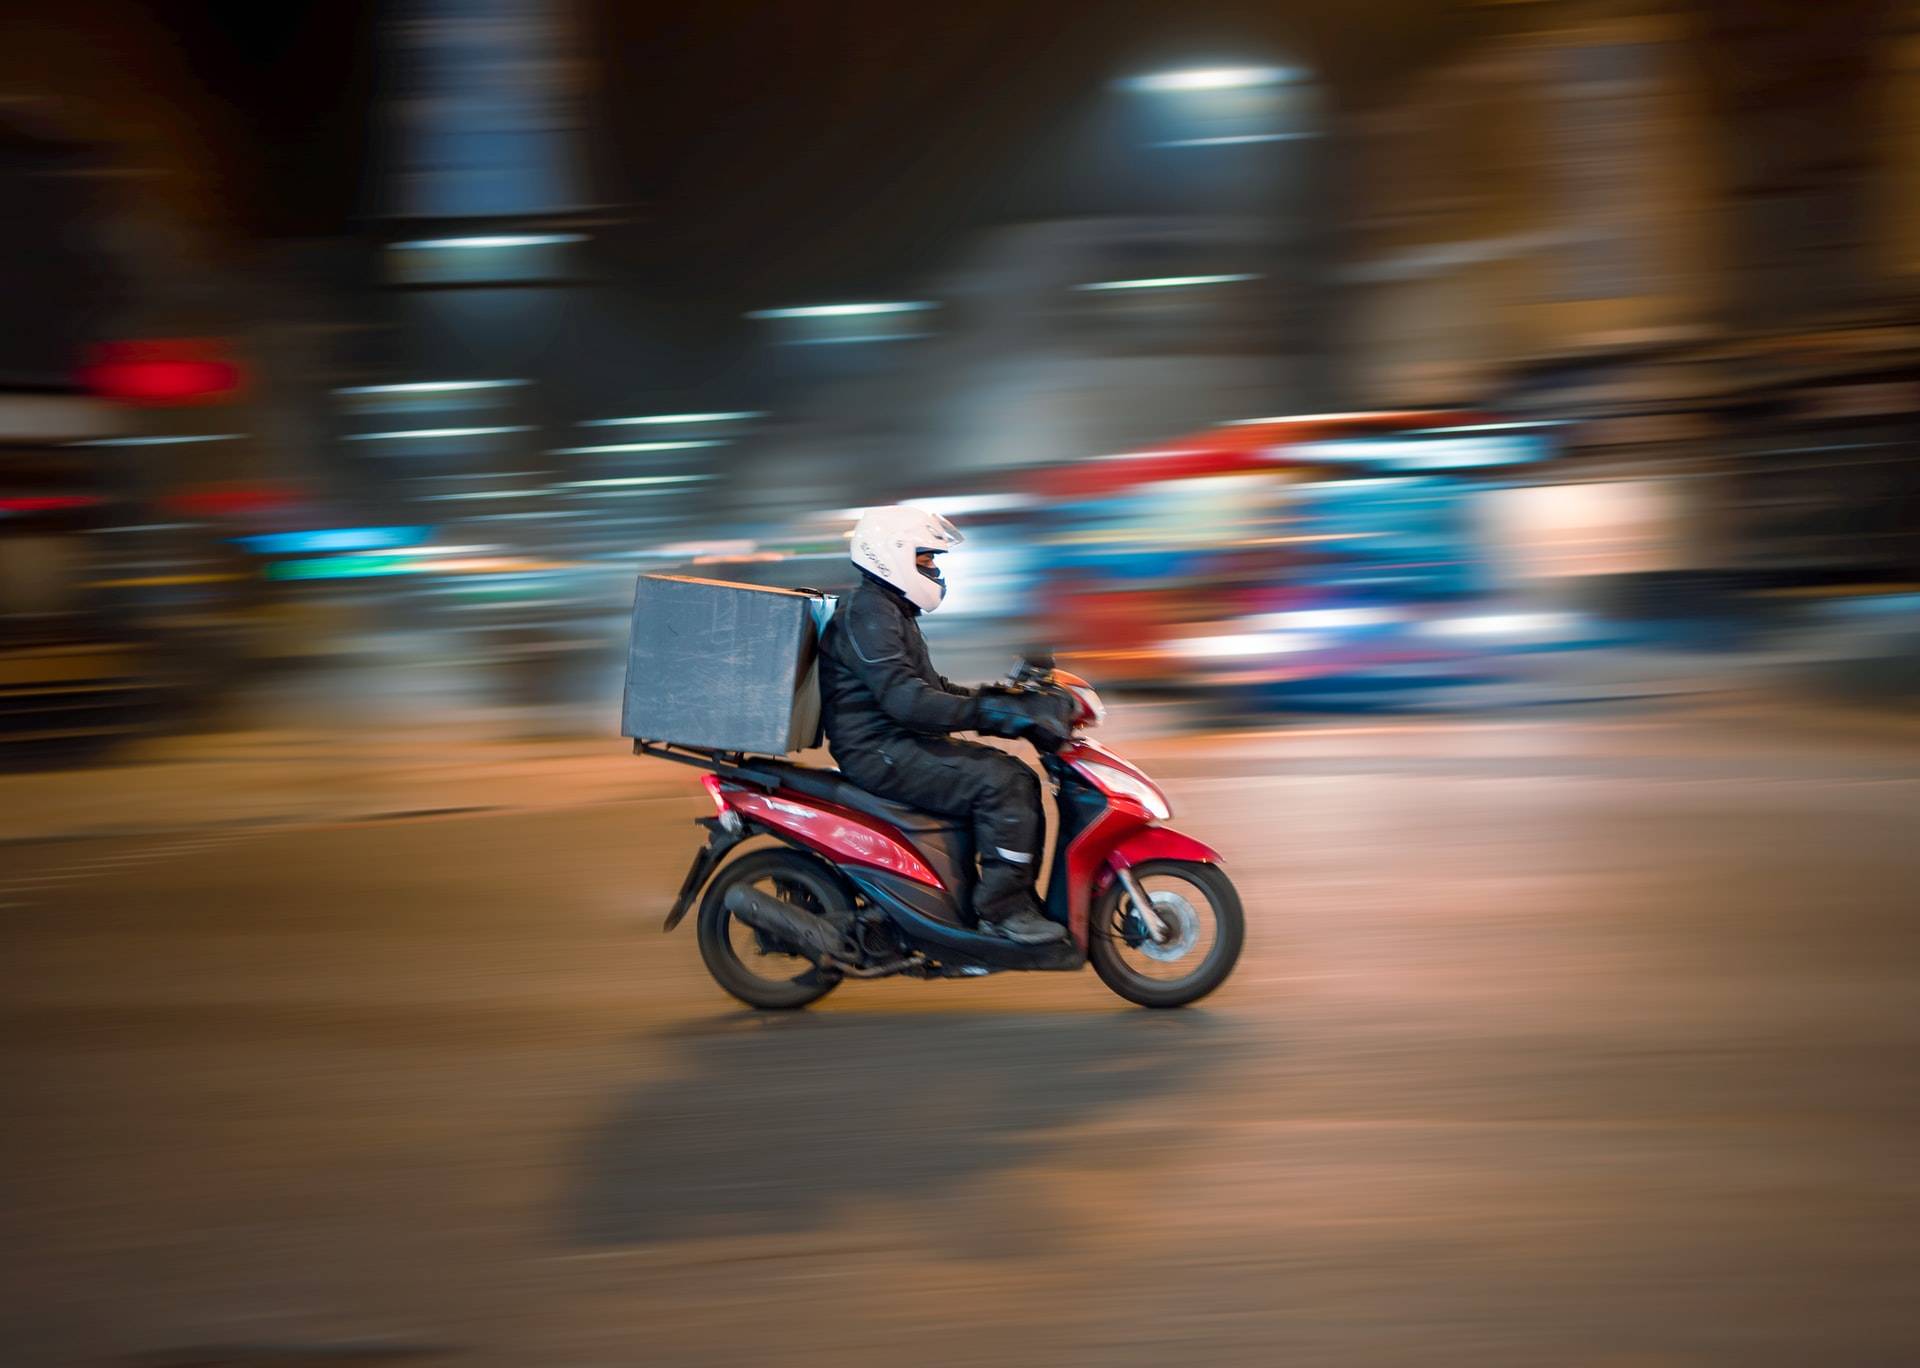 Photo of a man riding a motorised scooter with a luggage box on the back. Scooter and man are in focus while the background is blurred. 